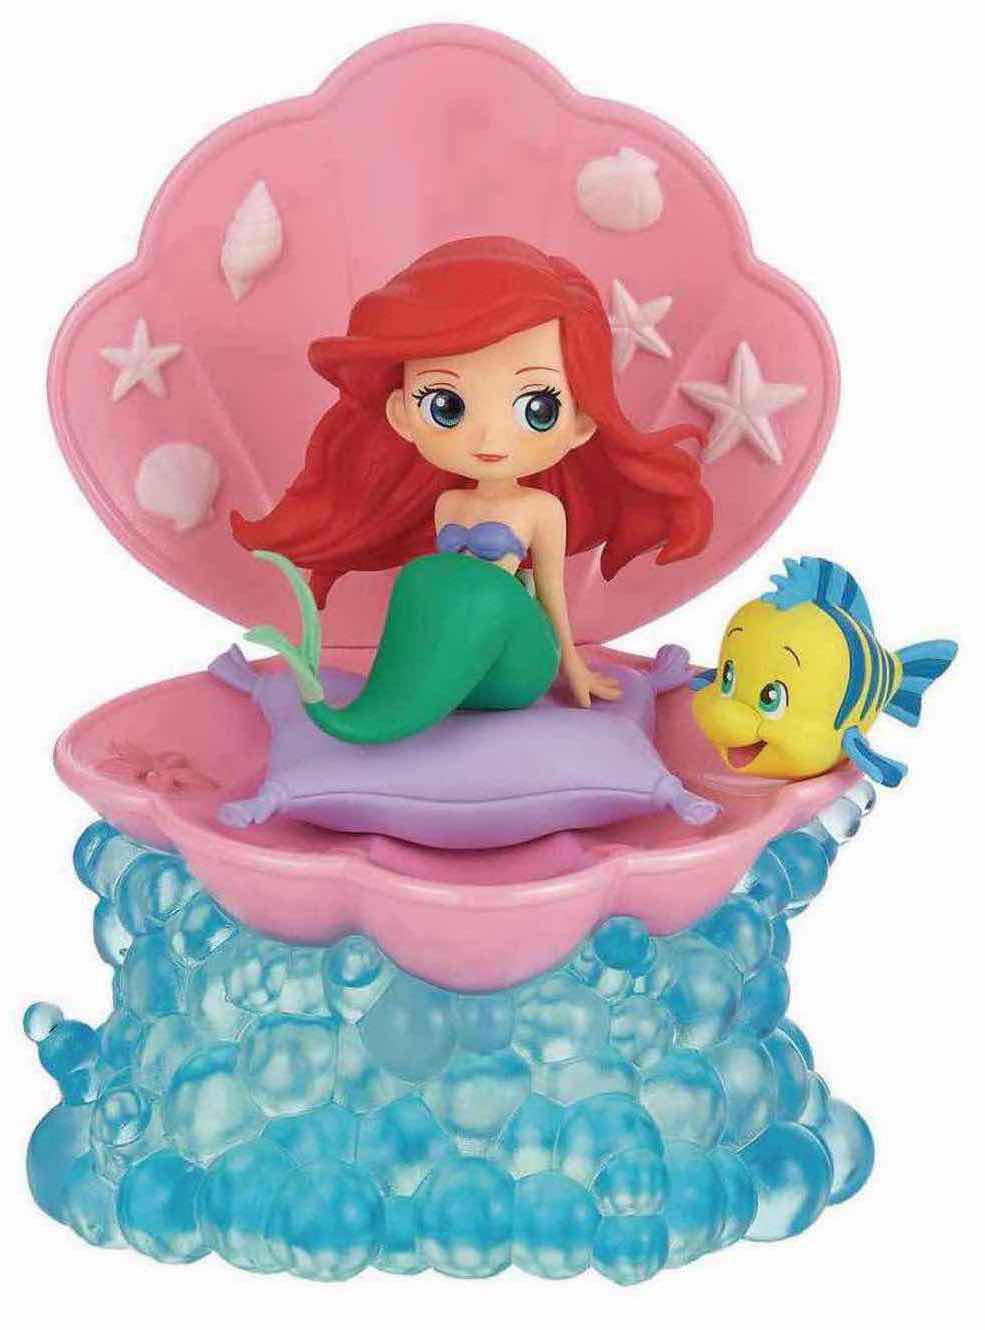 Photo 2 of NEW BANDAI Q POSKET STORIES, 2-PACK THE LITTLE MERMAID STATUE VERSION A (PINK) & VERSION B (PURPLE)